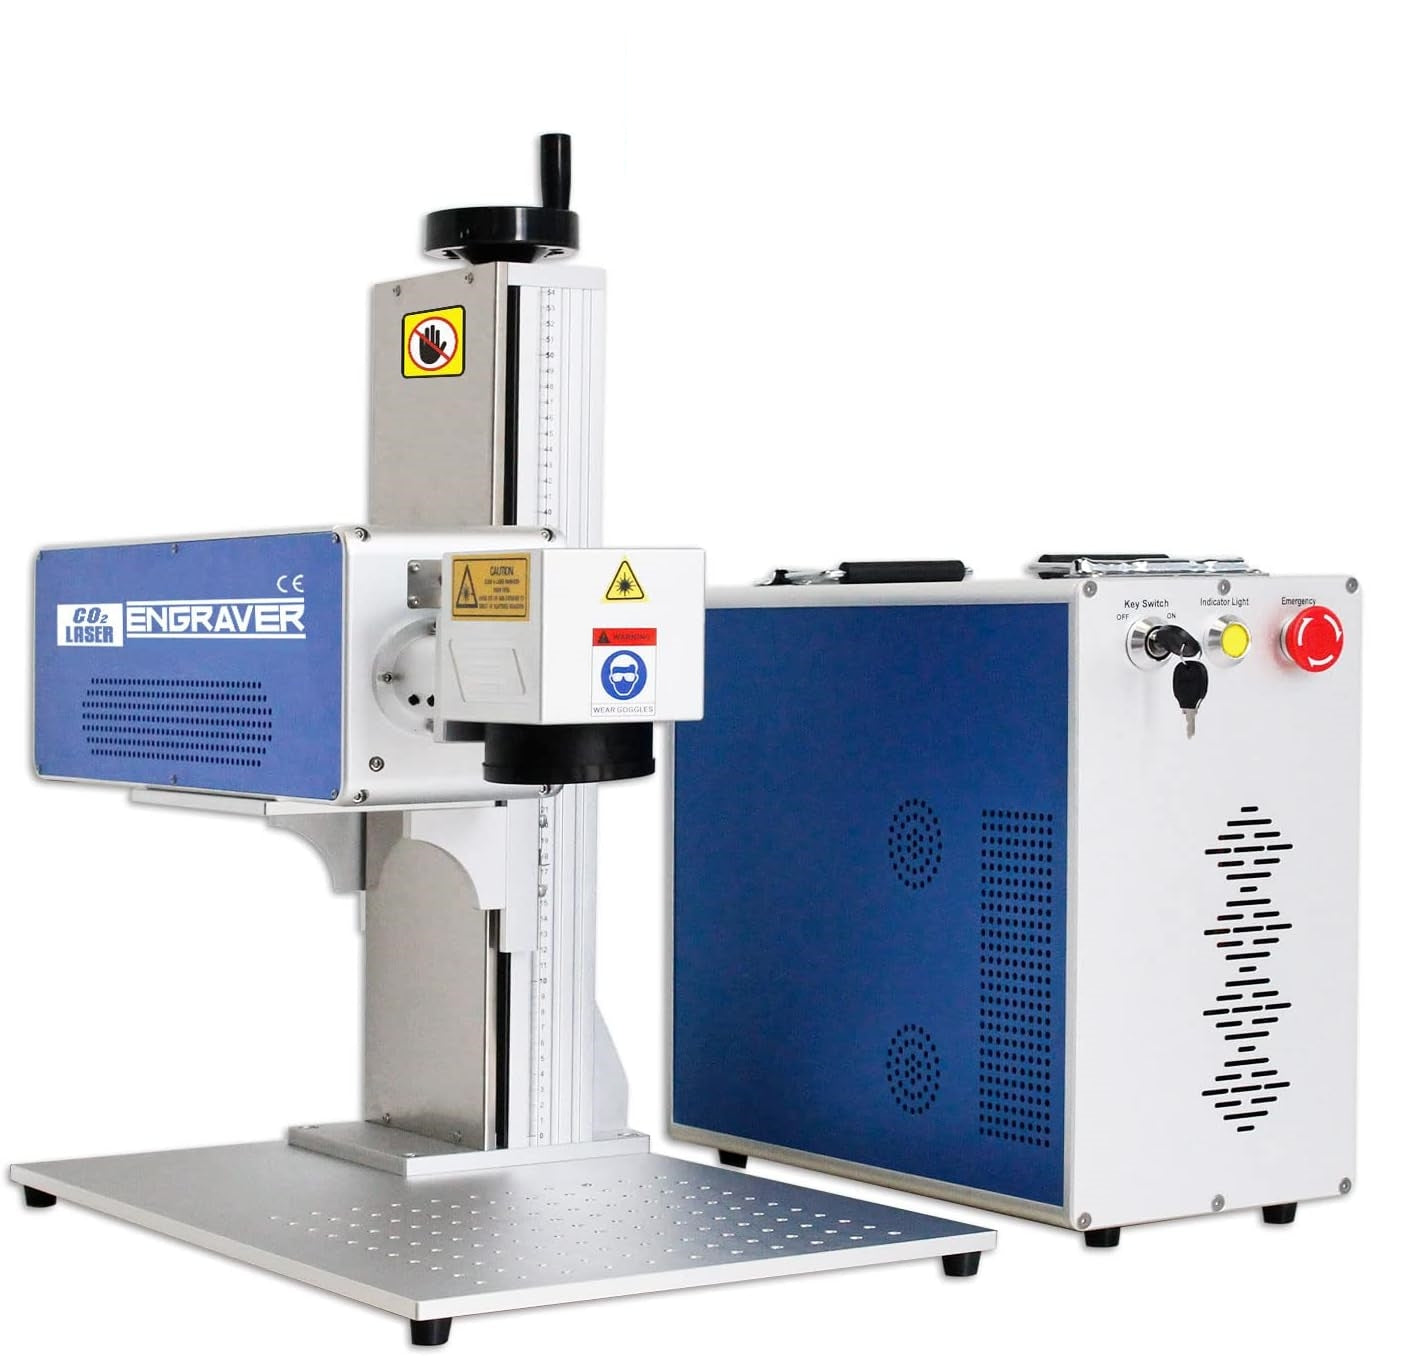 Fiber optic laser for portable engraving and cutting 30W